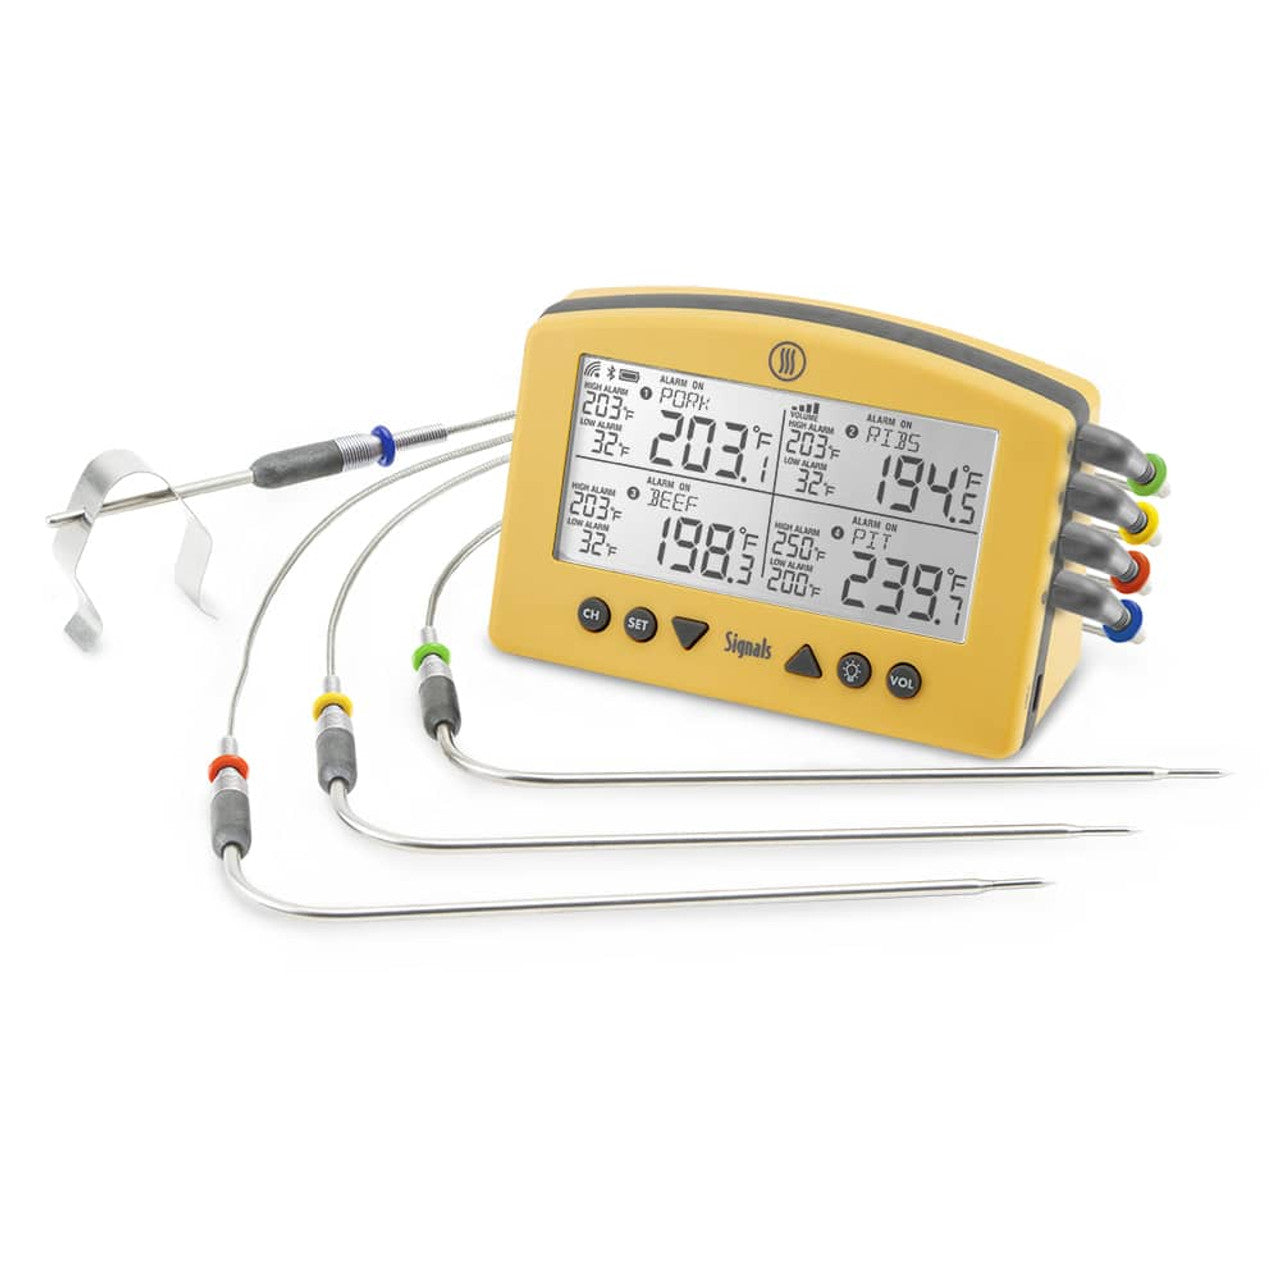 ThermoWorks ChefAlarm Meat Thermometer/Timer Yellow probe/case See